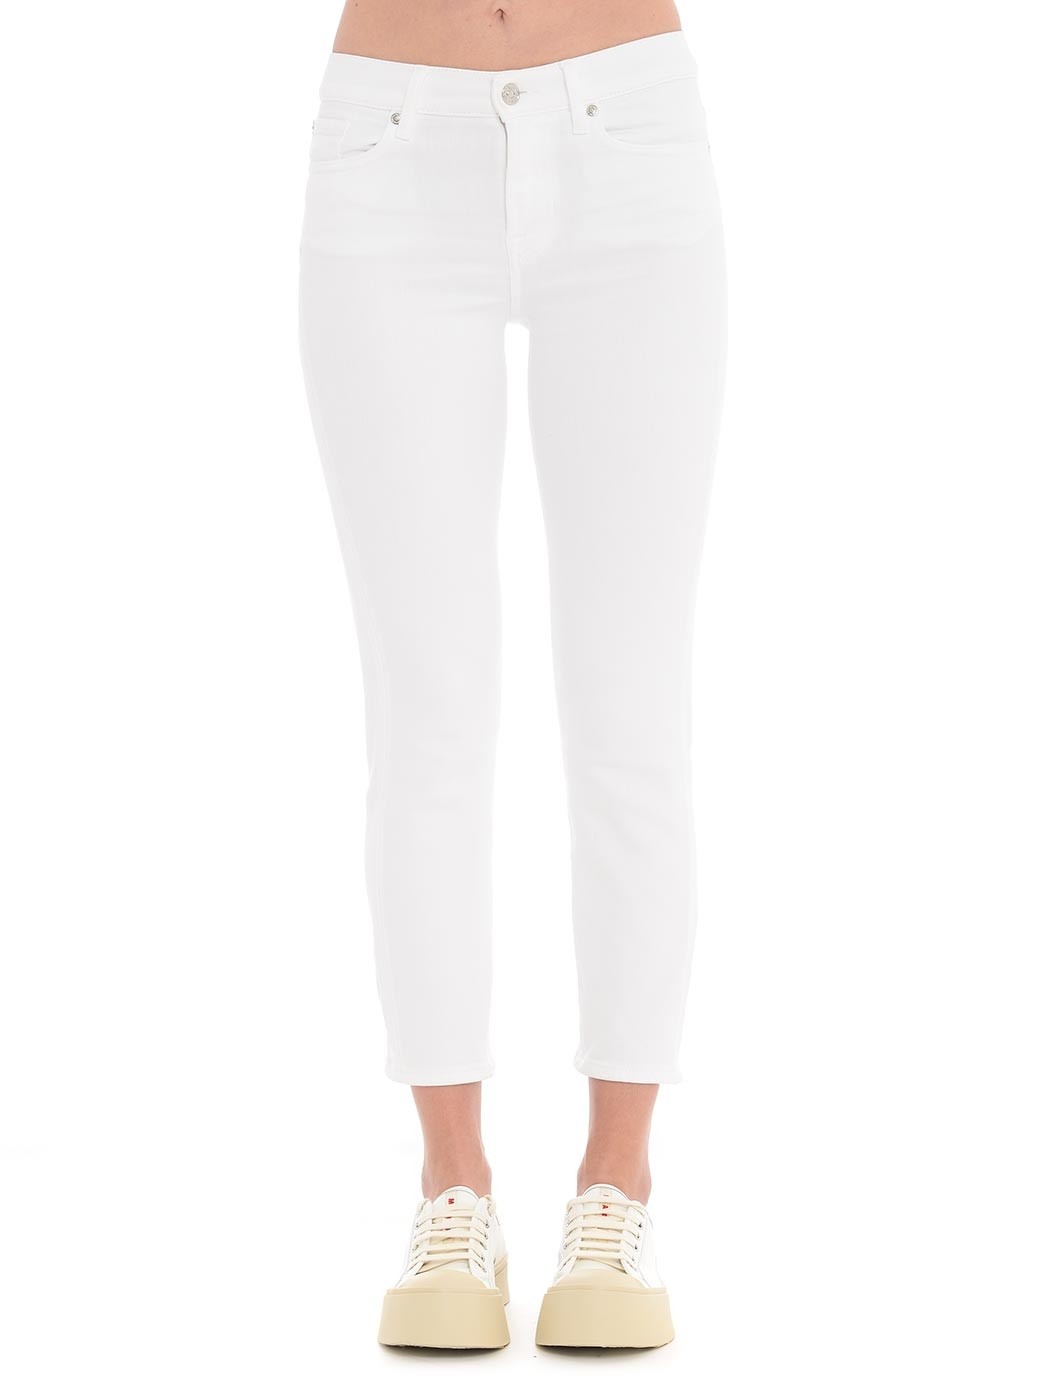  WOMAN TROUSERS,PALAZZO TROUSERS,SKINNY TROUSERS,MARNI TROUSERS,FORTE FORTE TROUSERS,8PM TROUSERS,MSGM TROUSERS,CROP PANTS  7 FOR ALL MANKIND JSVYC140